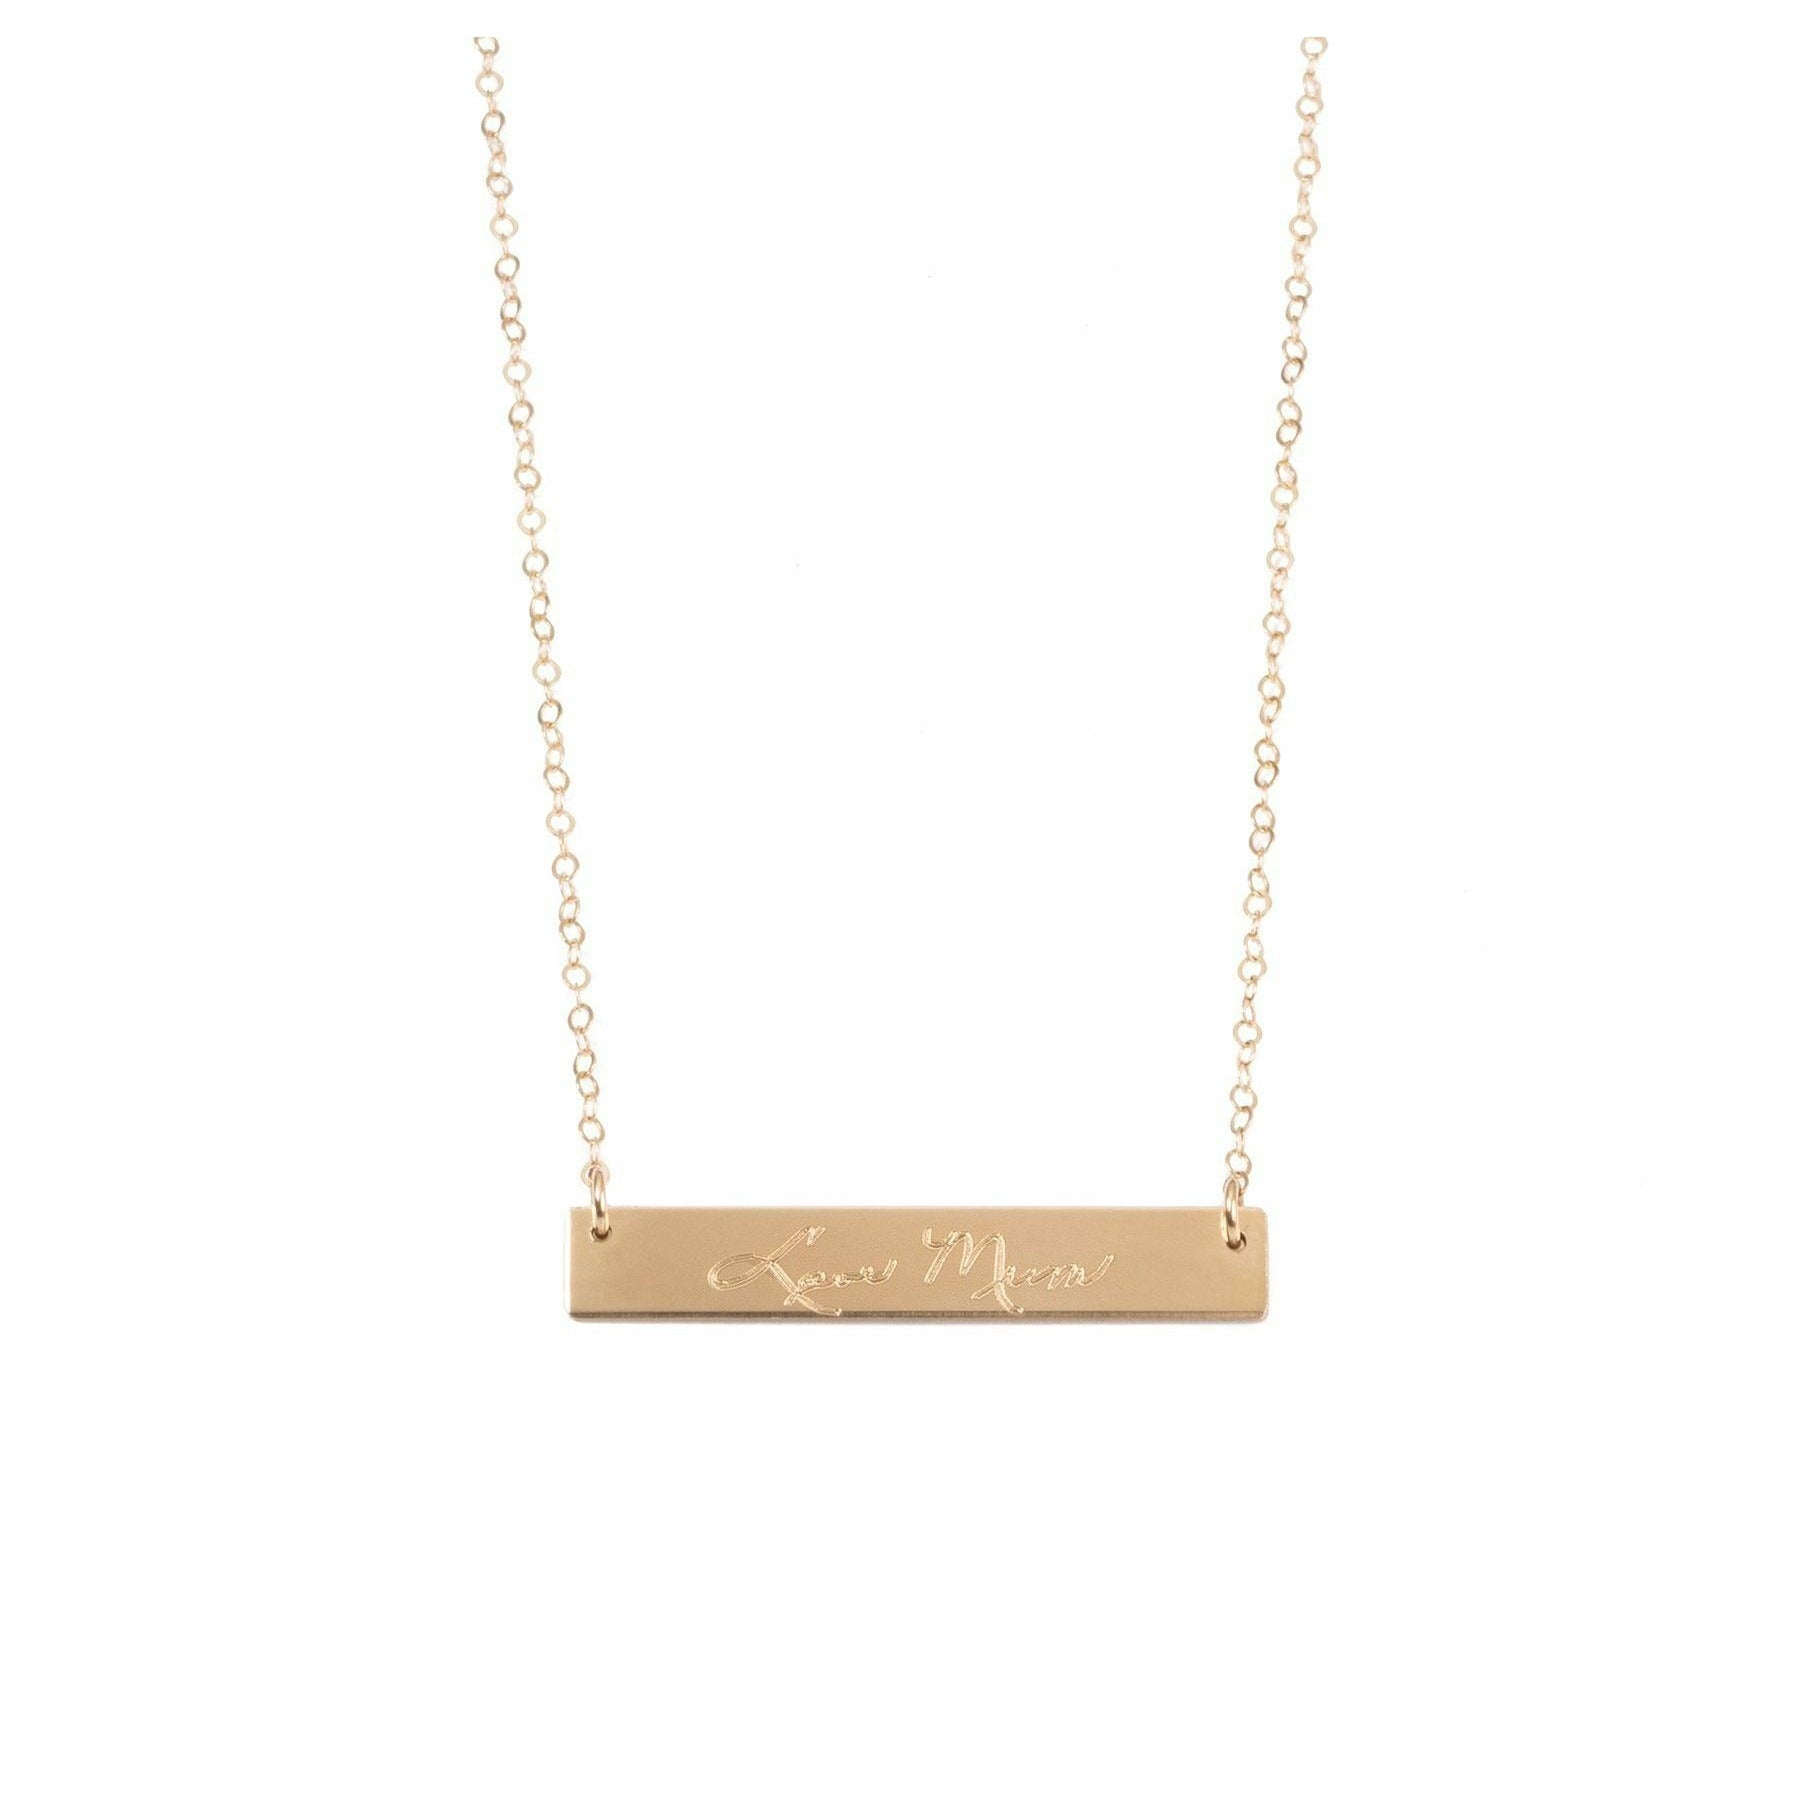 handmade actual handwriting bar necklace in rose gold